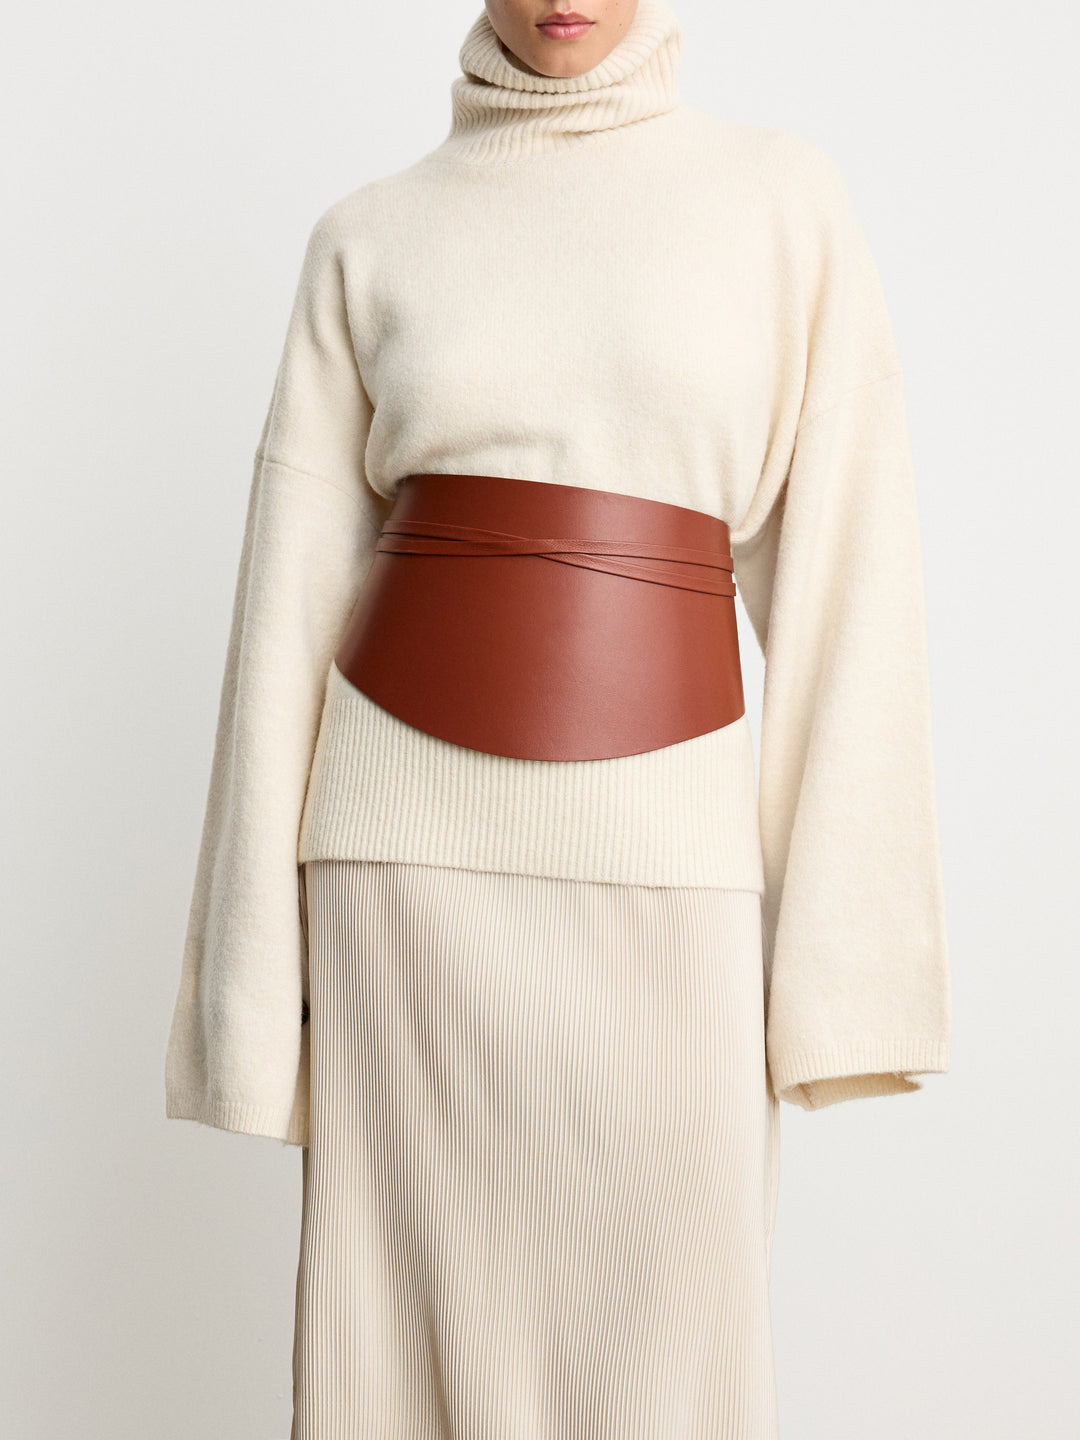 Déhanche Undone Corset in brown leather, worn over a cream turtleneck sweater and ribbed skirt, showcasing a chic and elegant front view.